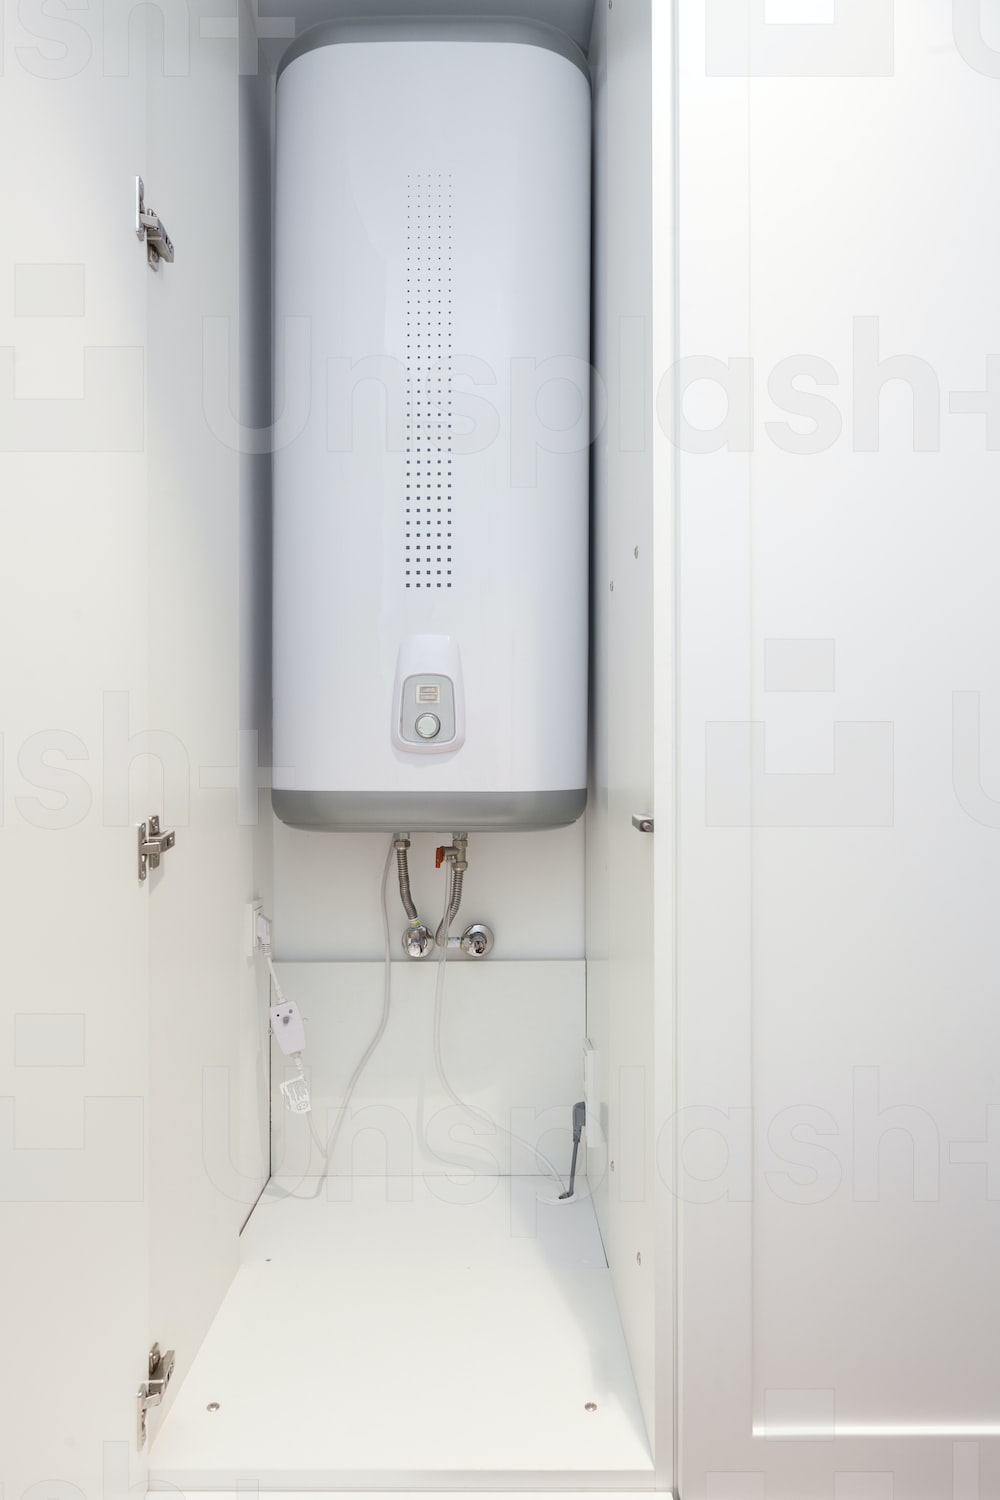 a white water heater.